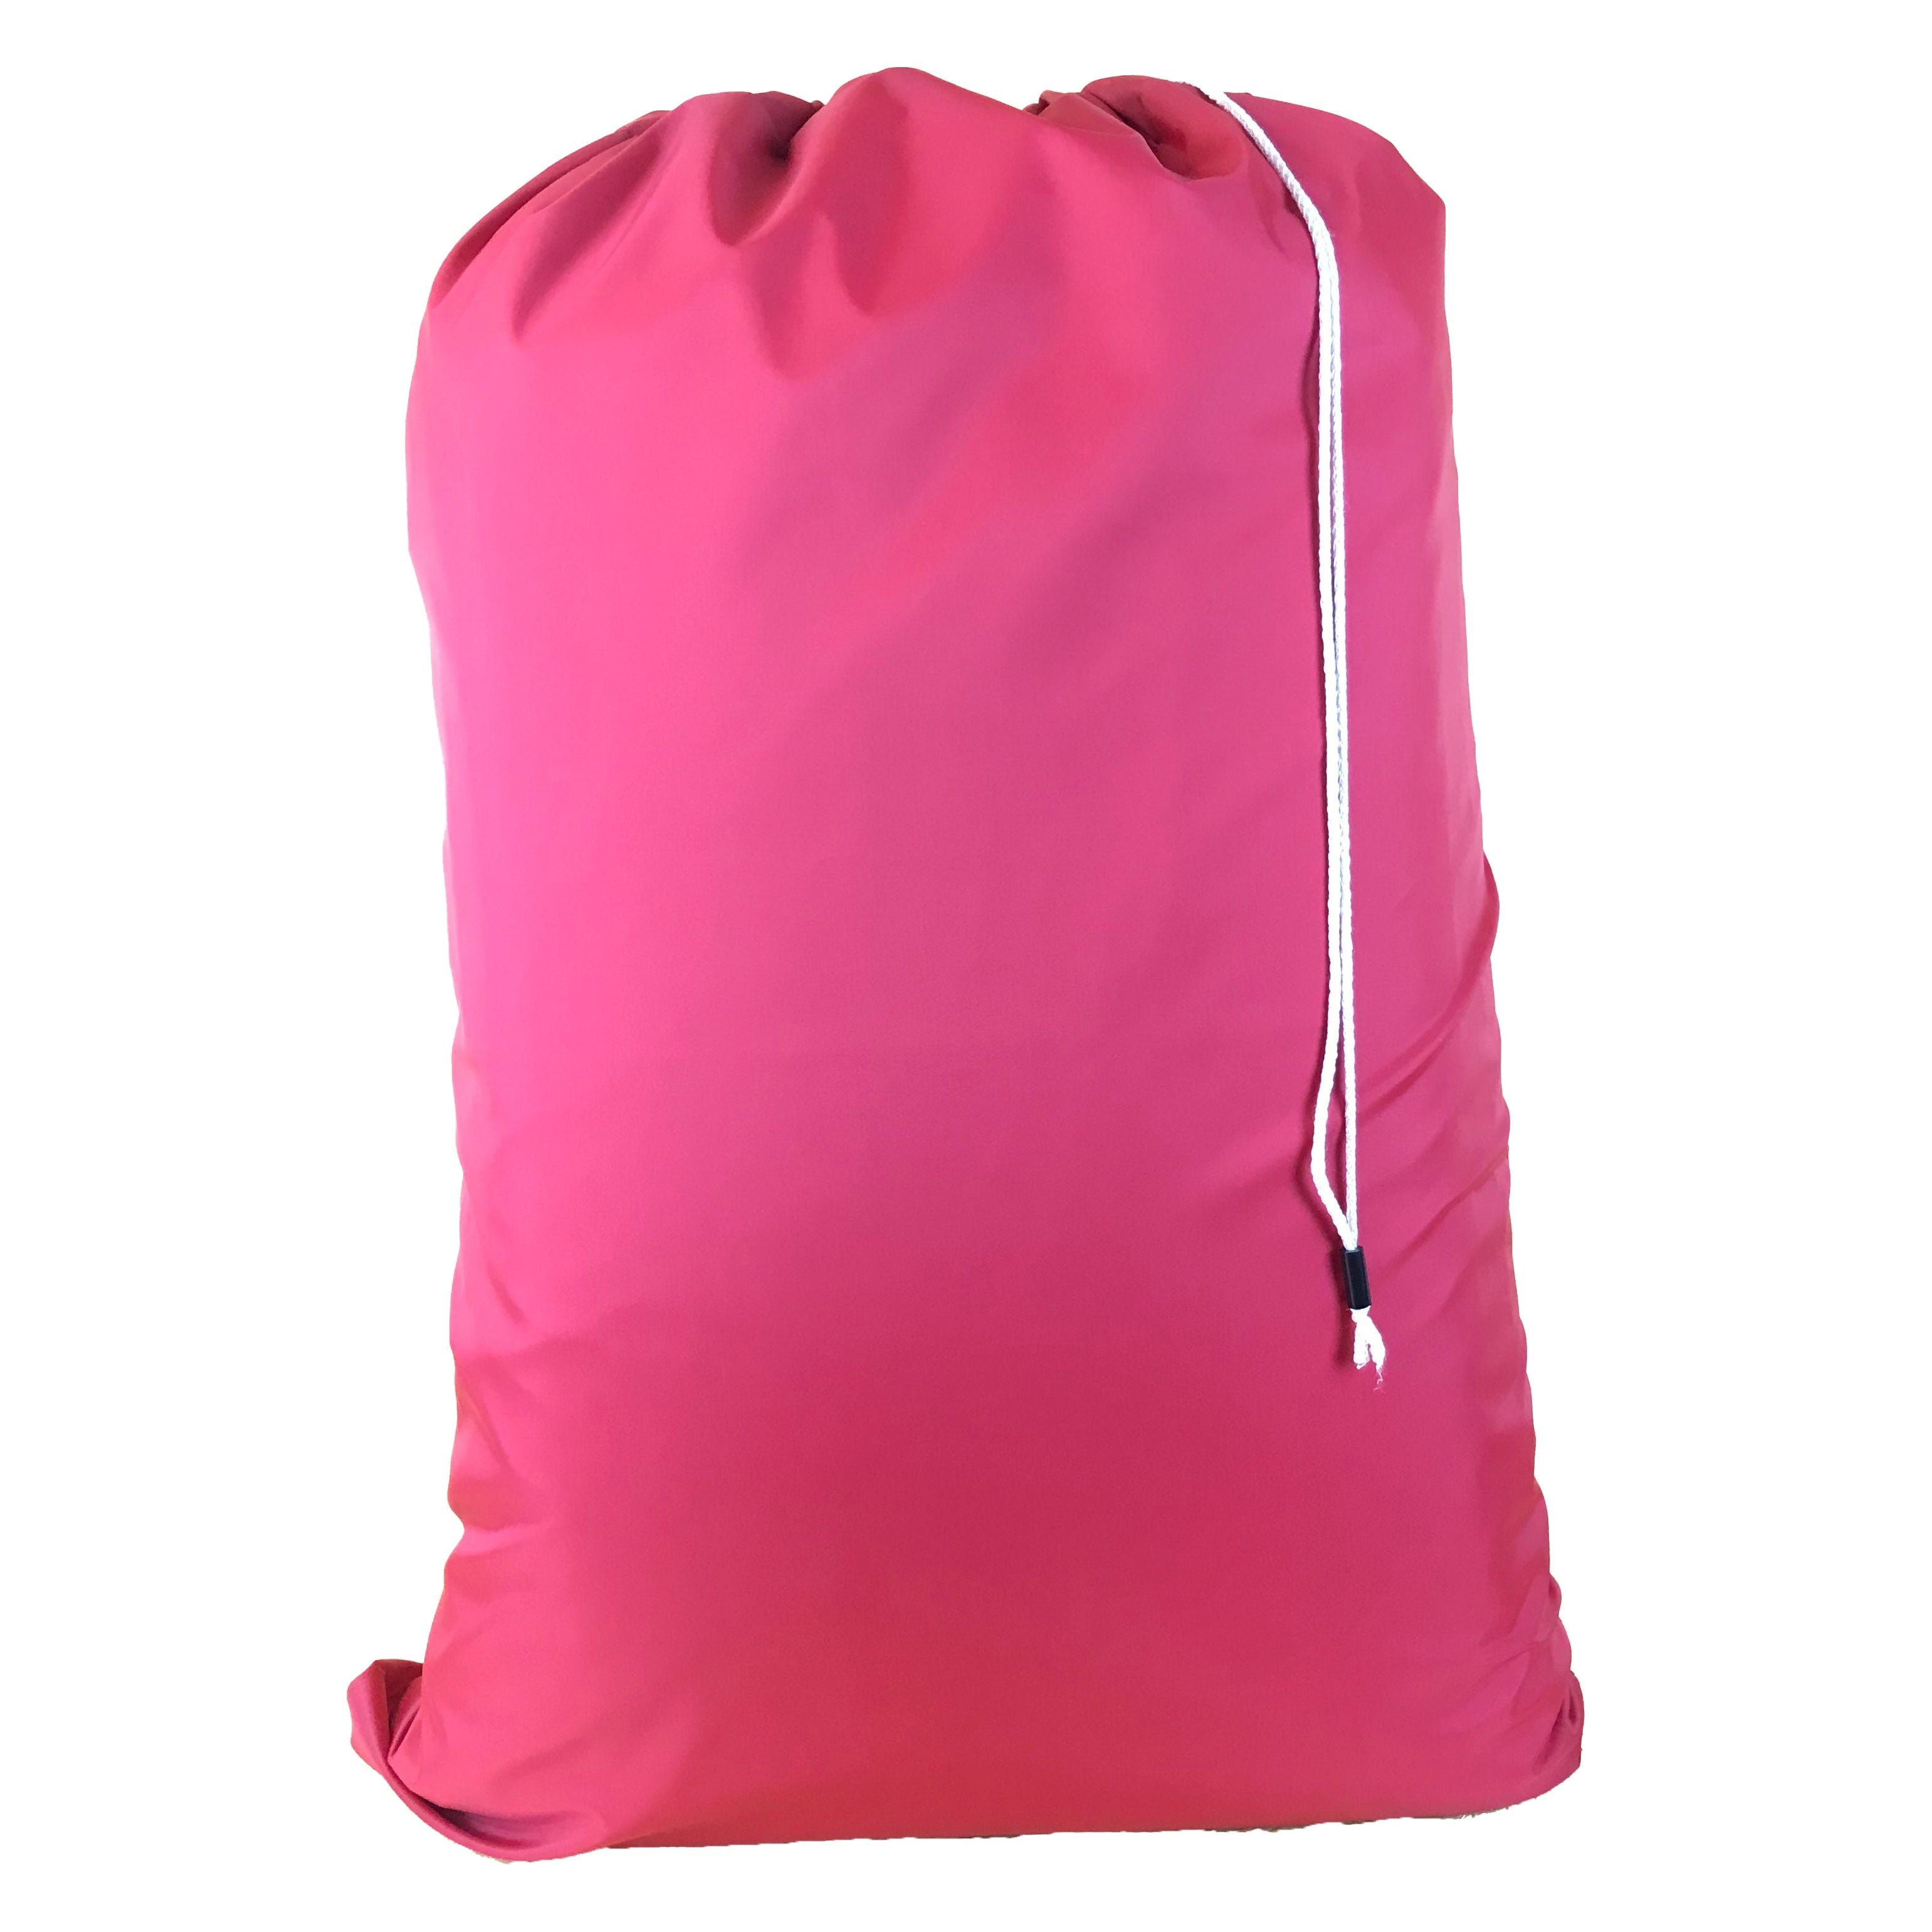 30" x 40" Heavy (210 Denier) Nylon Bags,  Color Red, 50 pcs/box, Sold by the Box, Price for 1 bag - $3.95 each bag